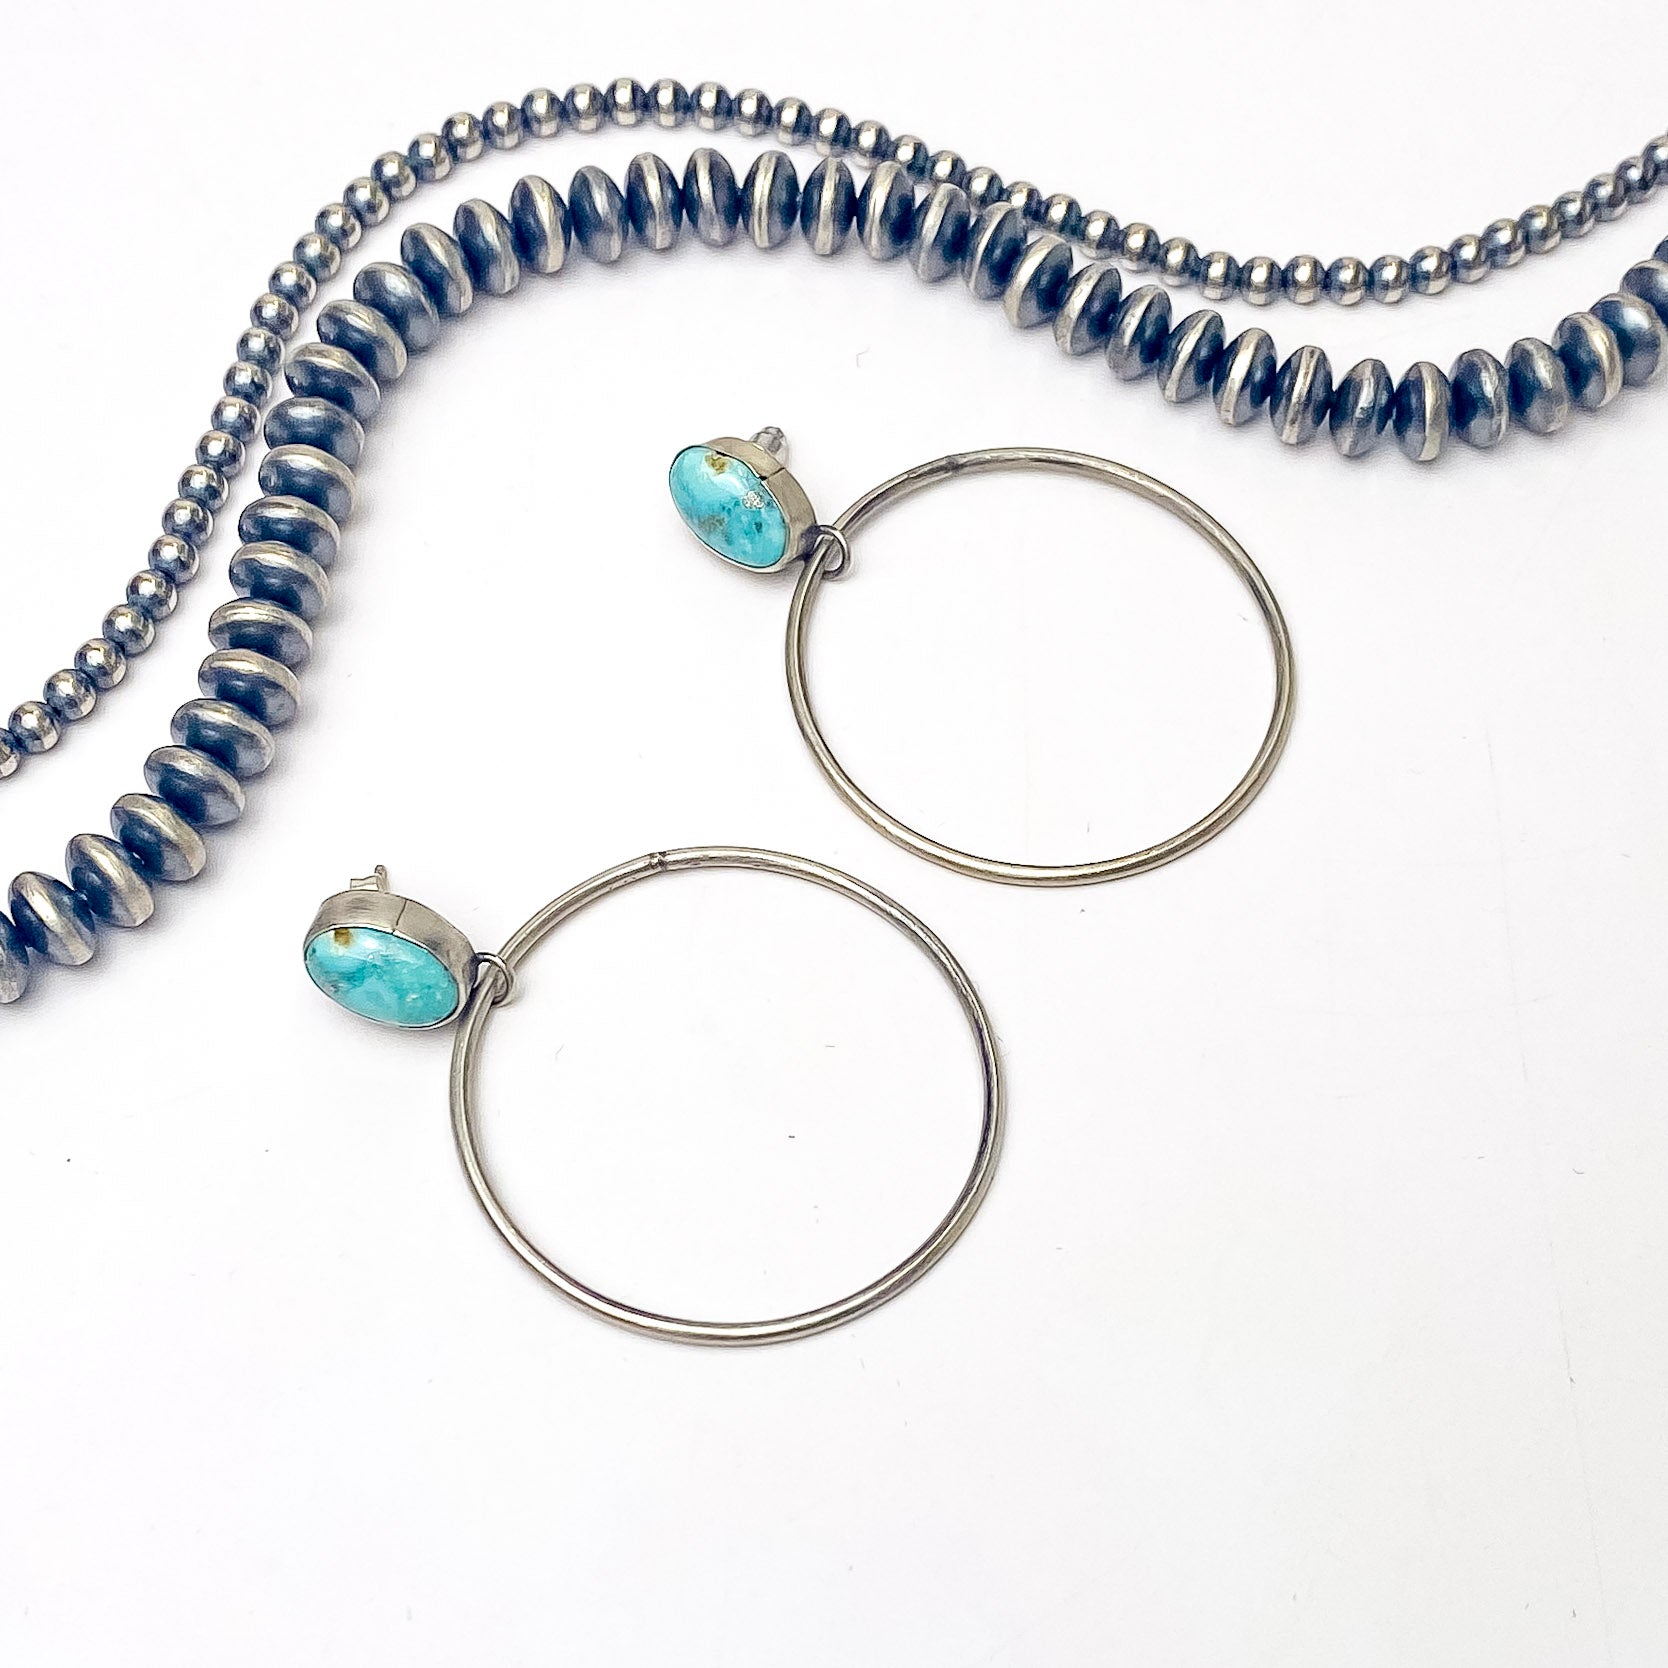 Tricia Smith | Navajo Handmade Hoop Sterling Silver Earrings with Turquoise Stones - Giddy Up Glamour Boutique